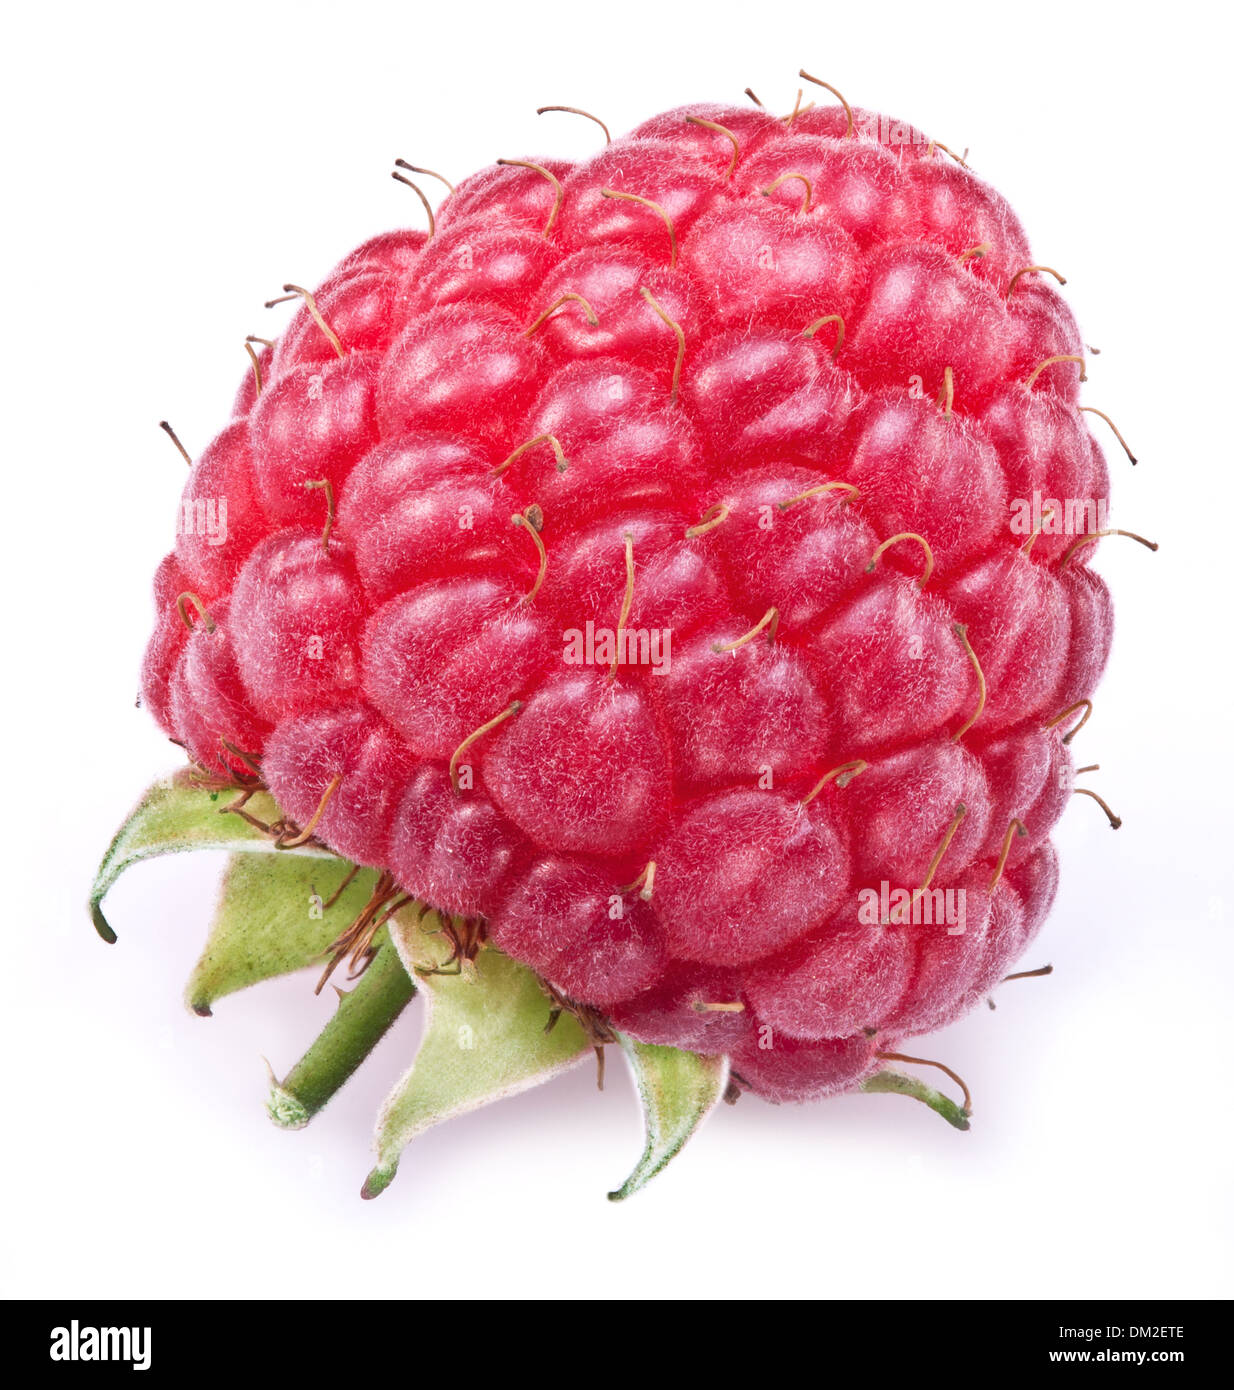 One rich raspberry fruit isolated on a white background. Stock Photo